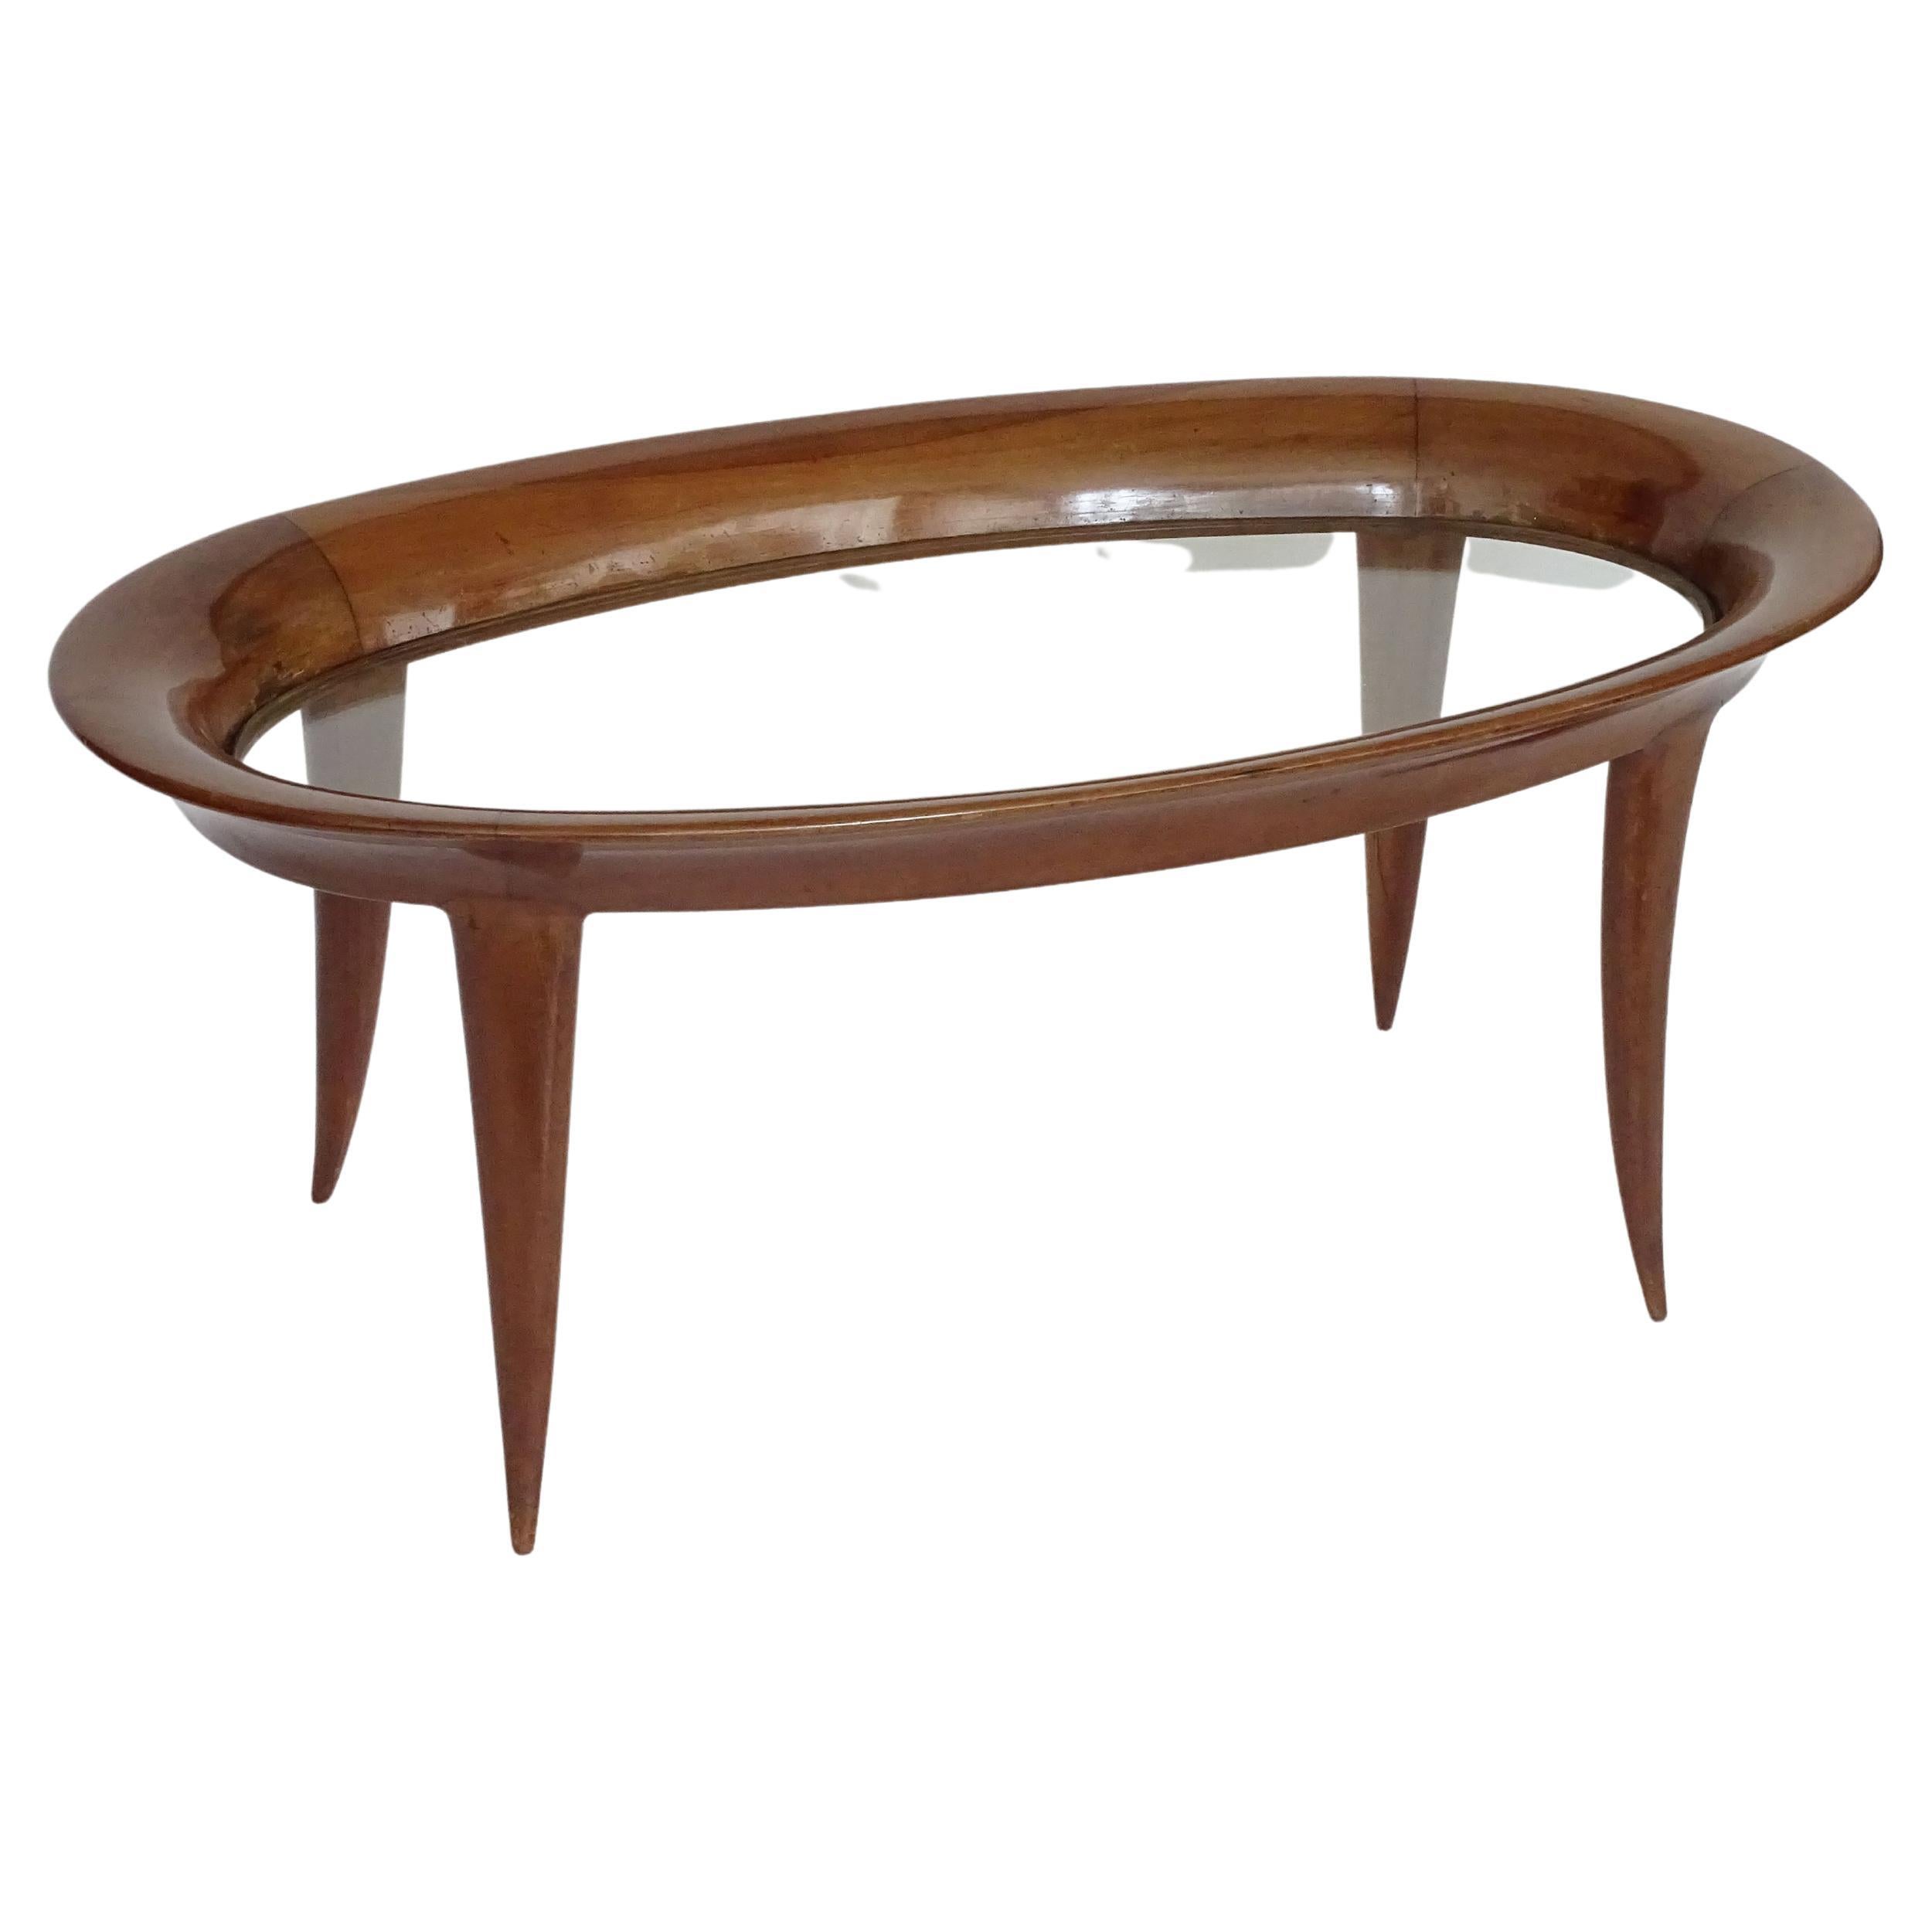 Italian 1940s Sculpted Oval Coffee Table Attributed to Fontana Arte